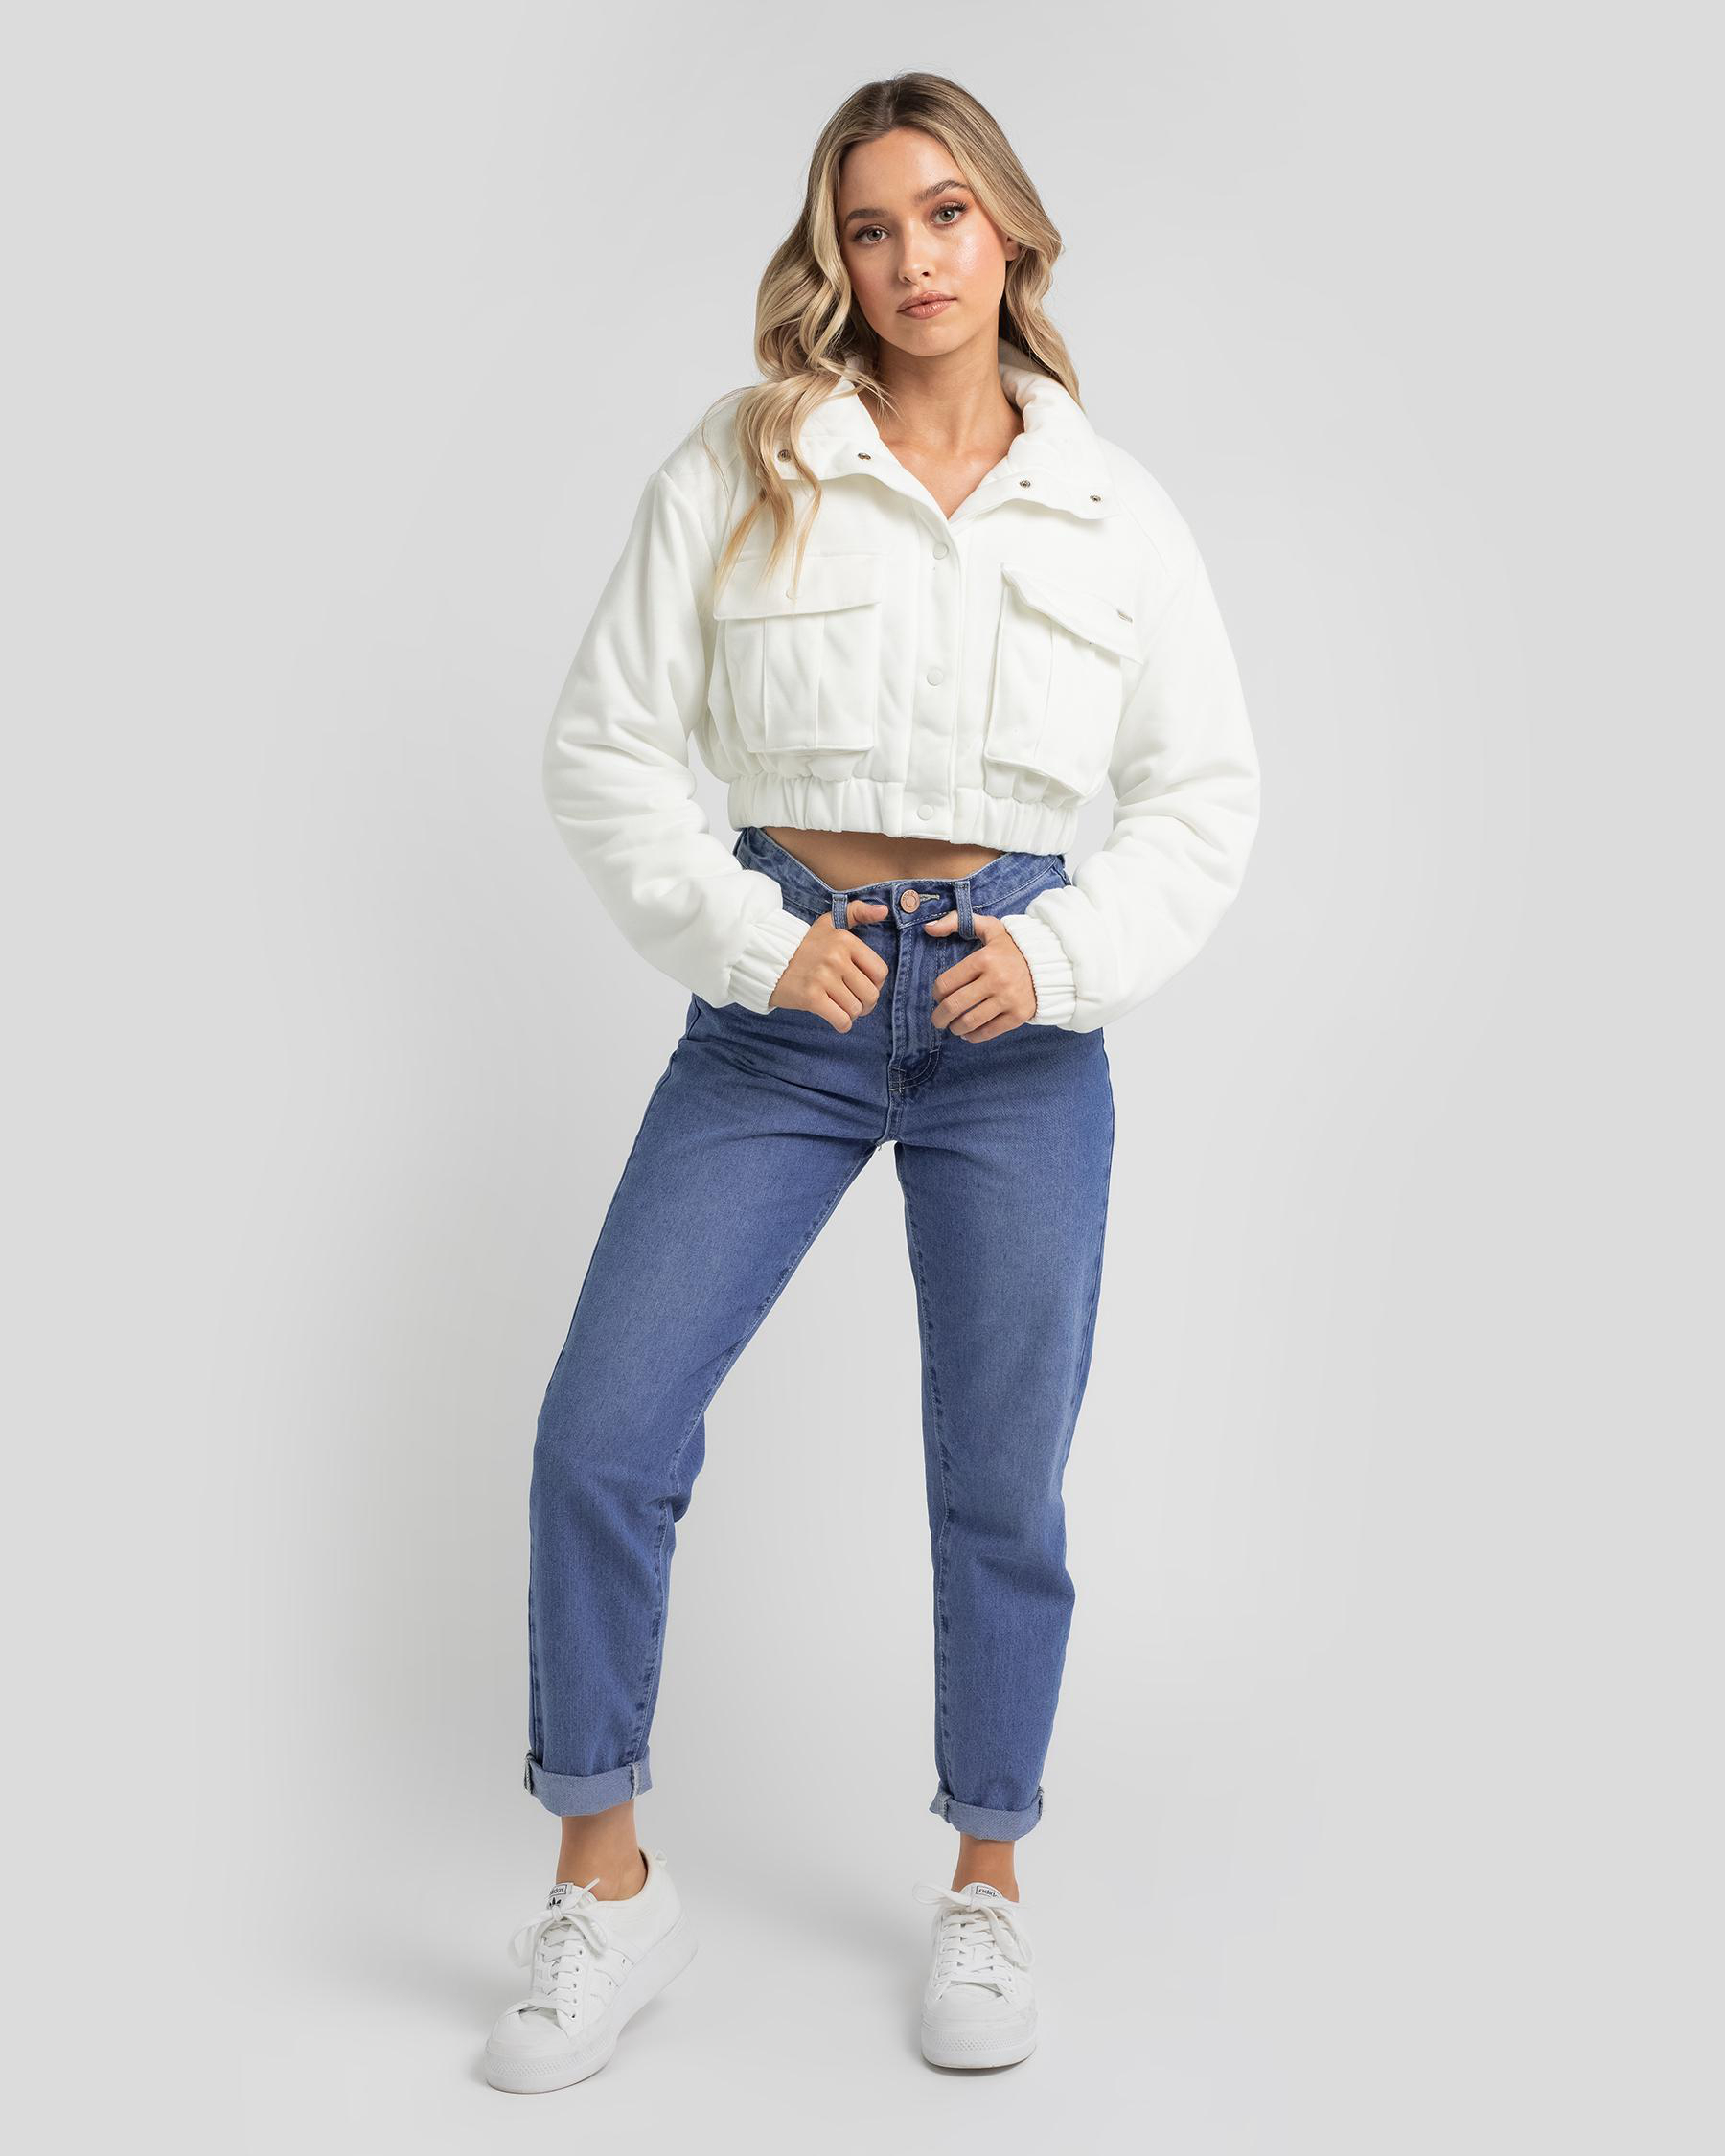 Shop Ava And Ever Viv Sweatshirt In White - Fast Shipping & Easy ...